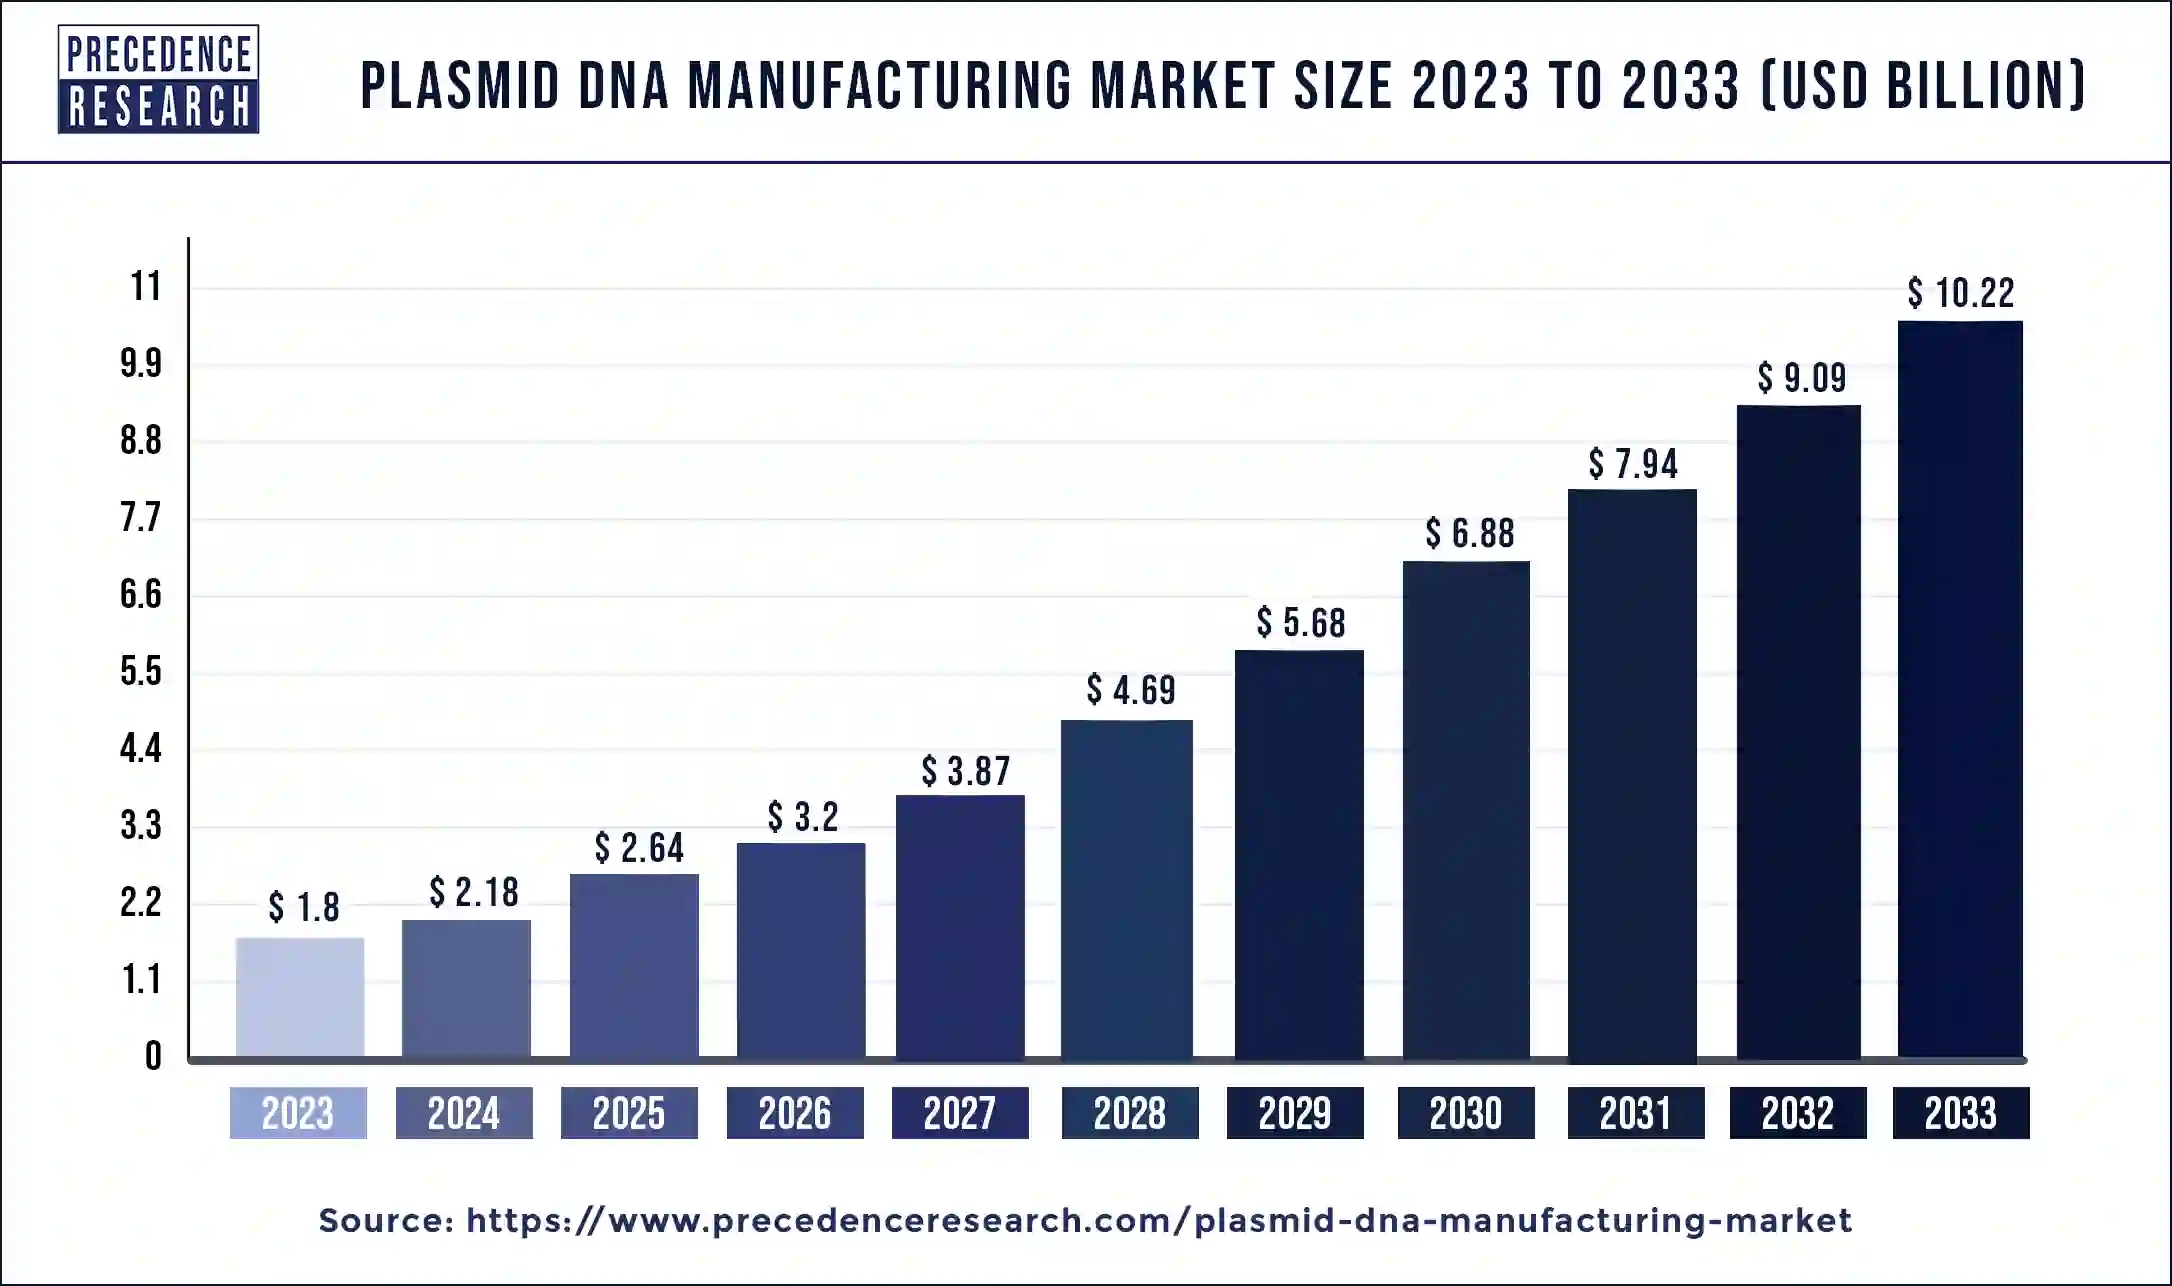 Plasmid DNA Manufacturing Market Size 2022 to 2033